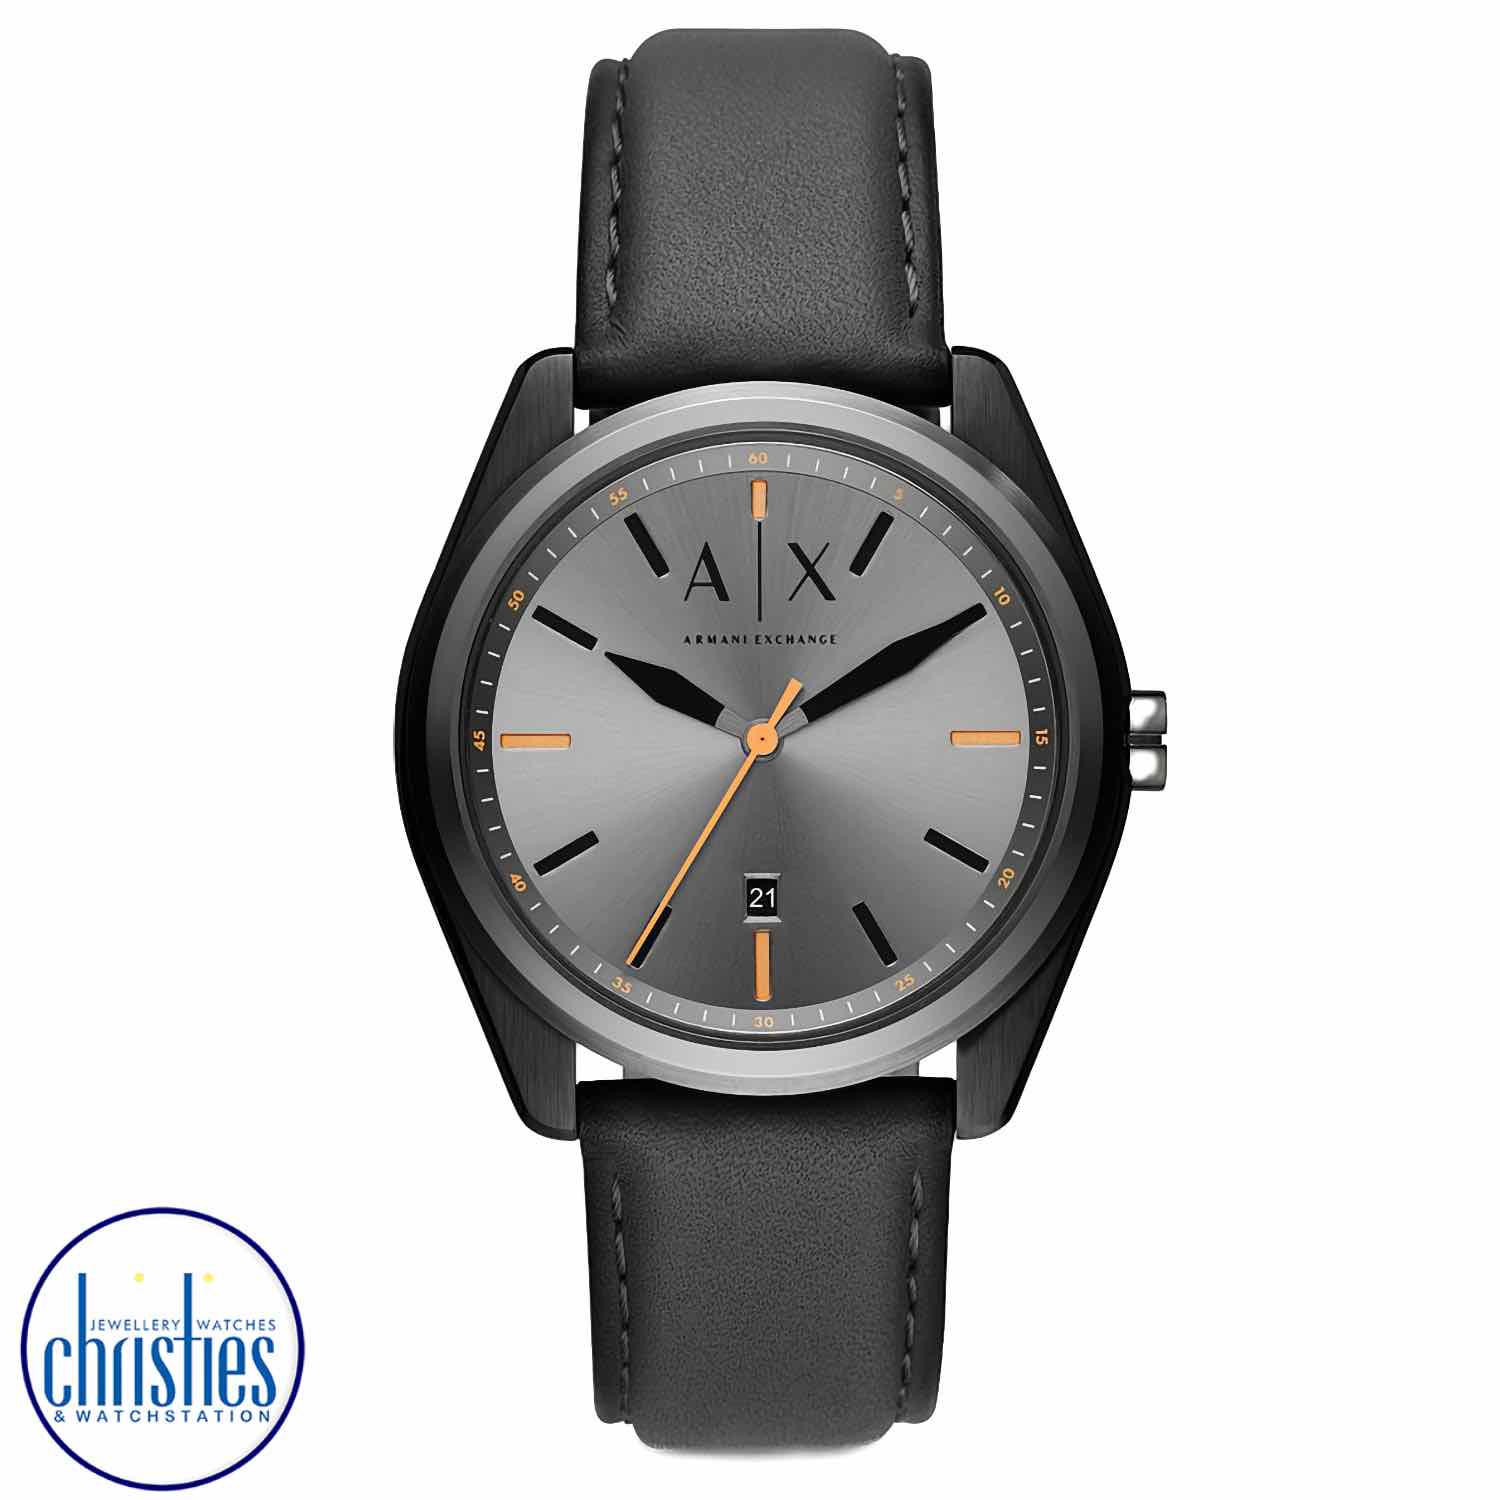 AX2859 A|X Armani Exchange Three-Hand Black Leather Watch. AX2859 A|X Armani Exchange Three-Hand Black Leather WatchAfterpay - Split your purchase into 4 instalments - Pay for your purchase over 4 instalments, due every two weeks.